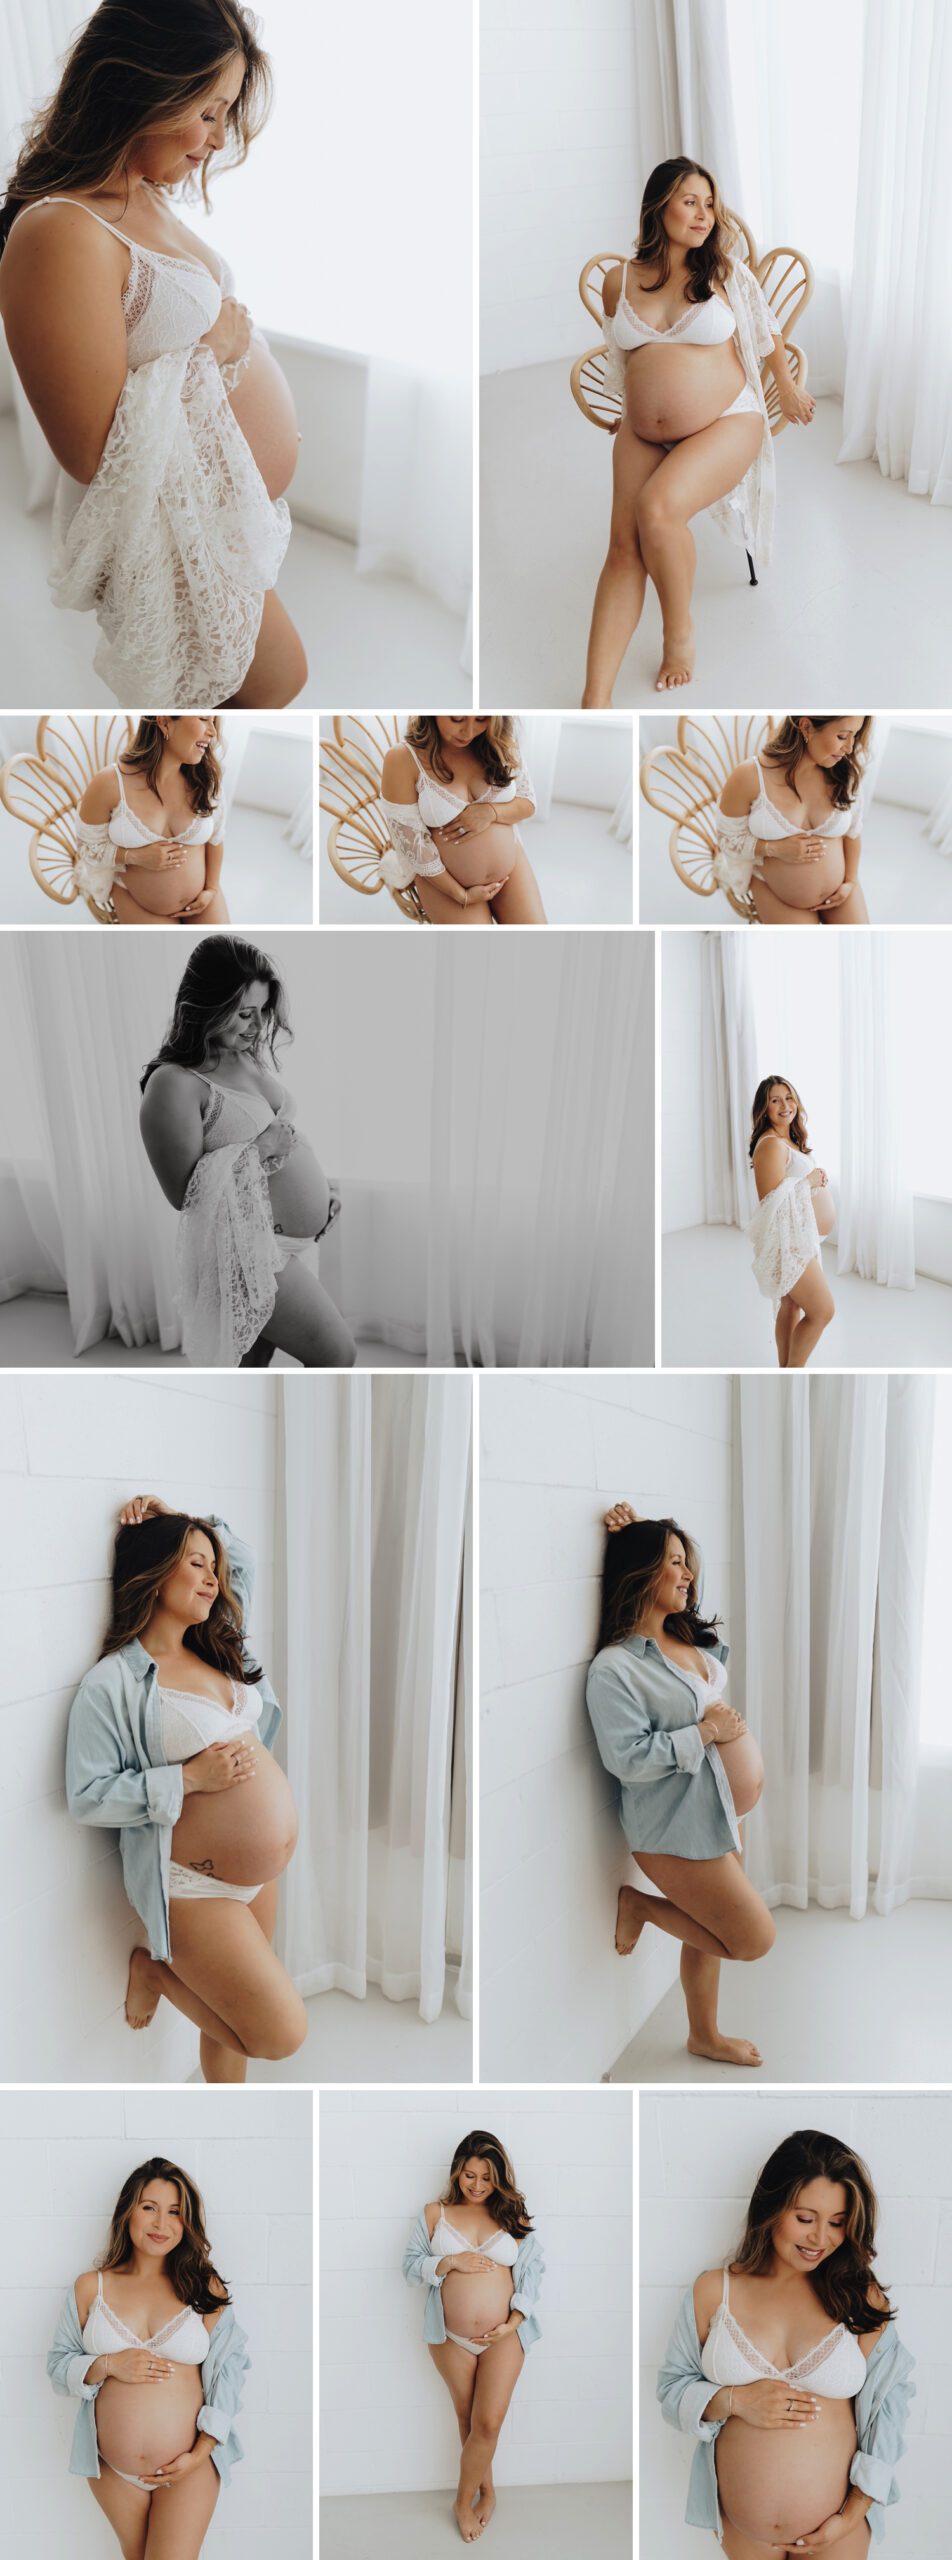 Beautiful pregnant mom shows off her baby bump in her third trimester during a photoshoot